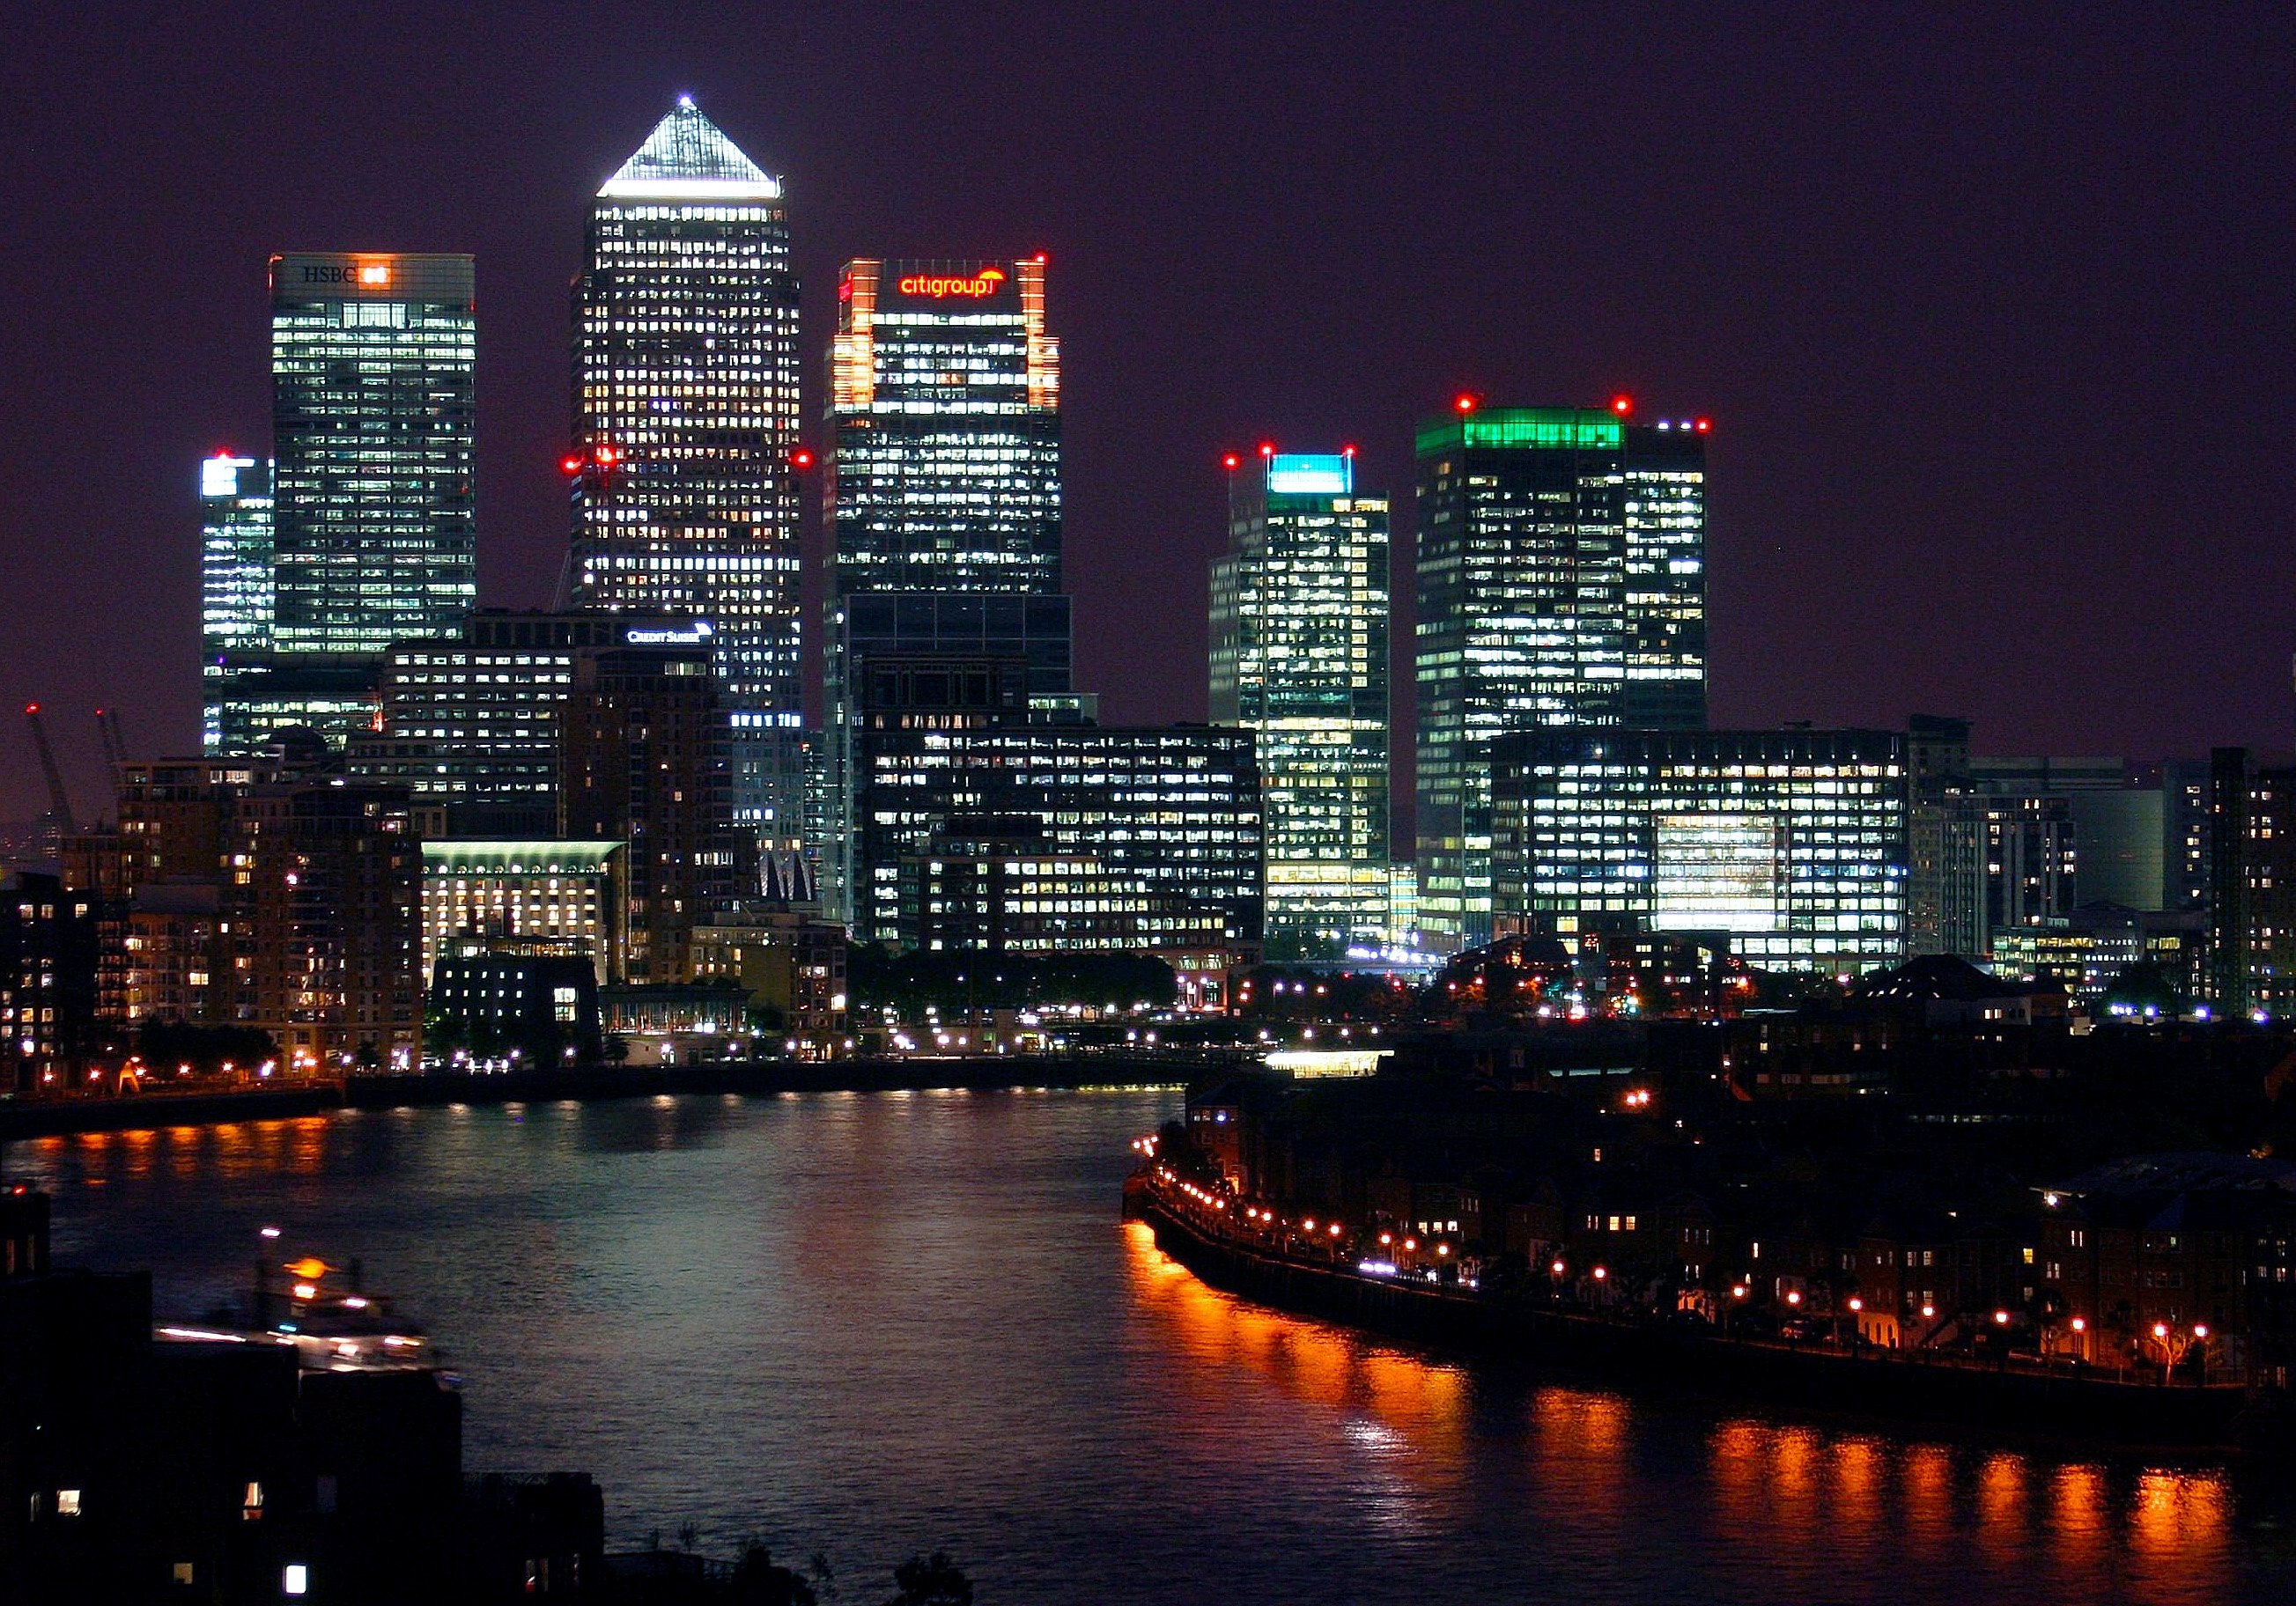 The city of London at night, with multicoloured lights shining from the skyscrapers of the financial district and reflected in the river below.